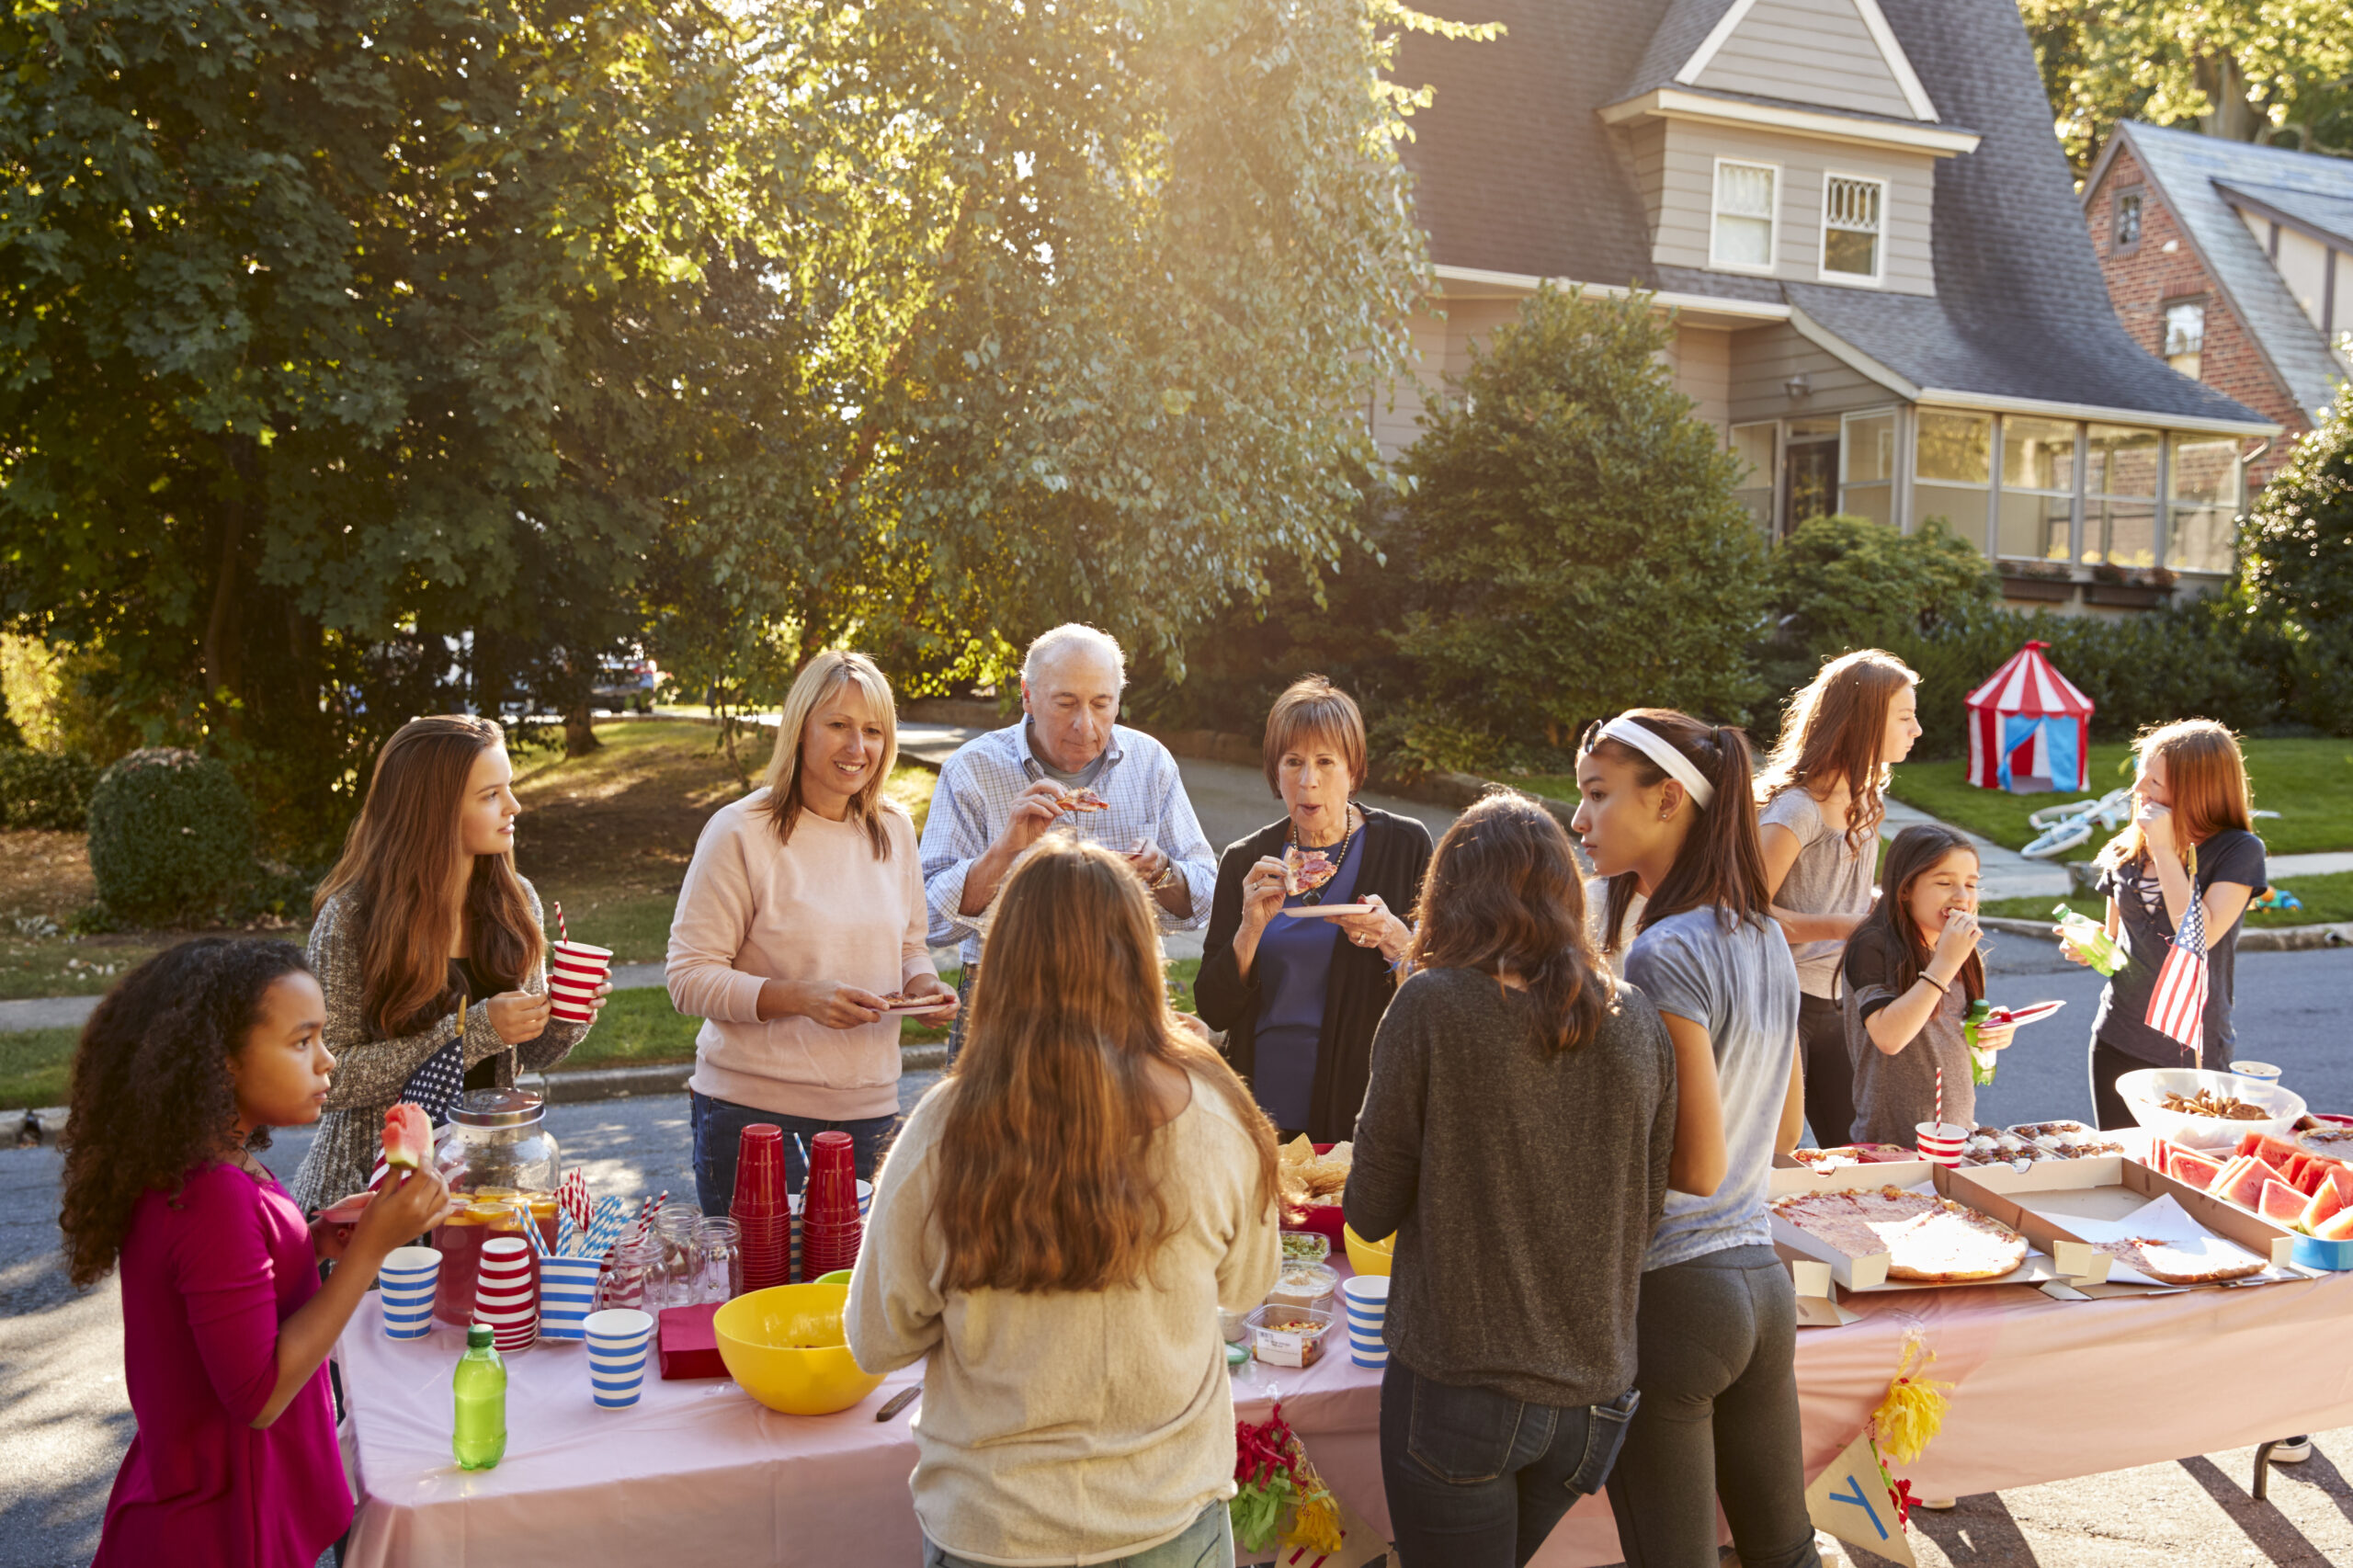 Neighbors build community at a block party.